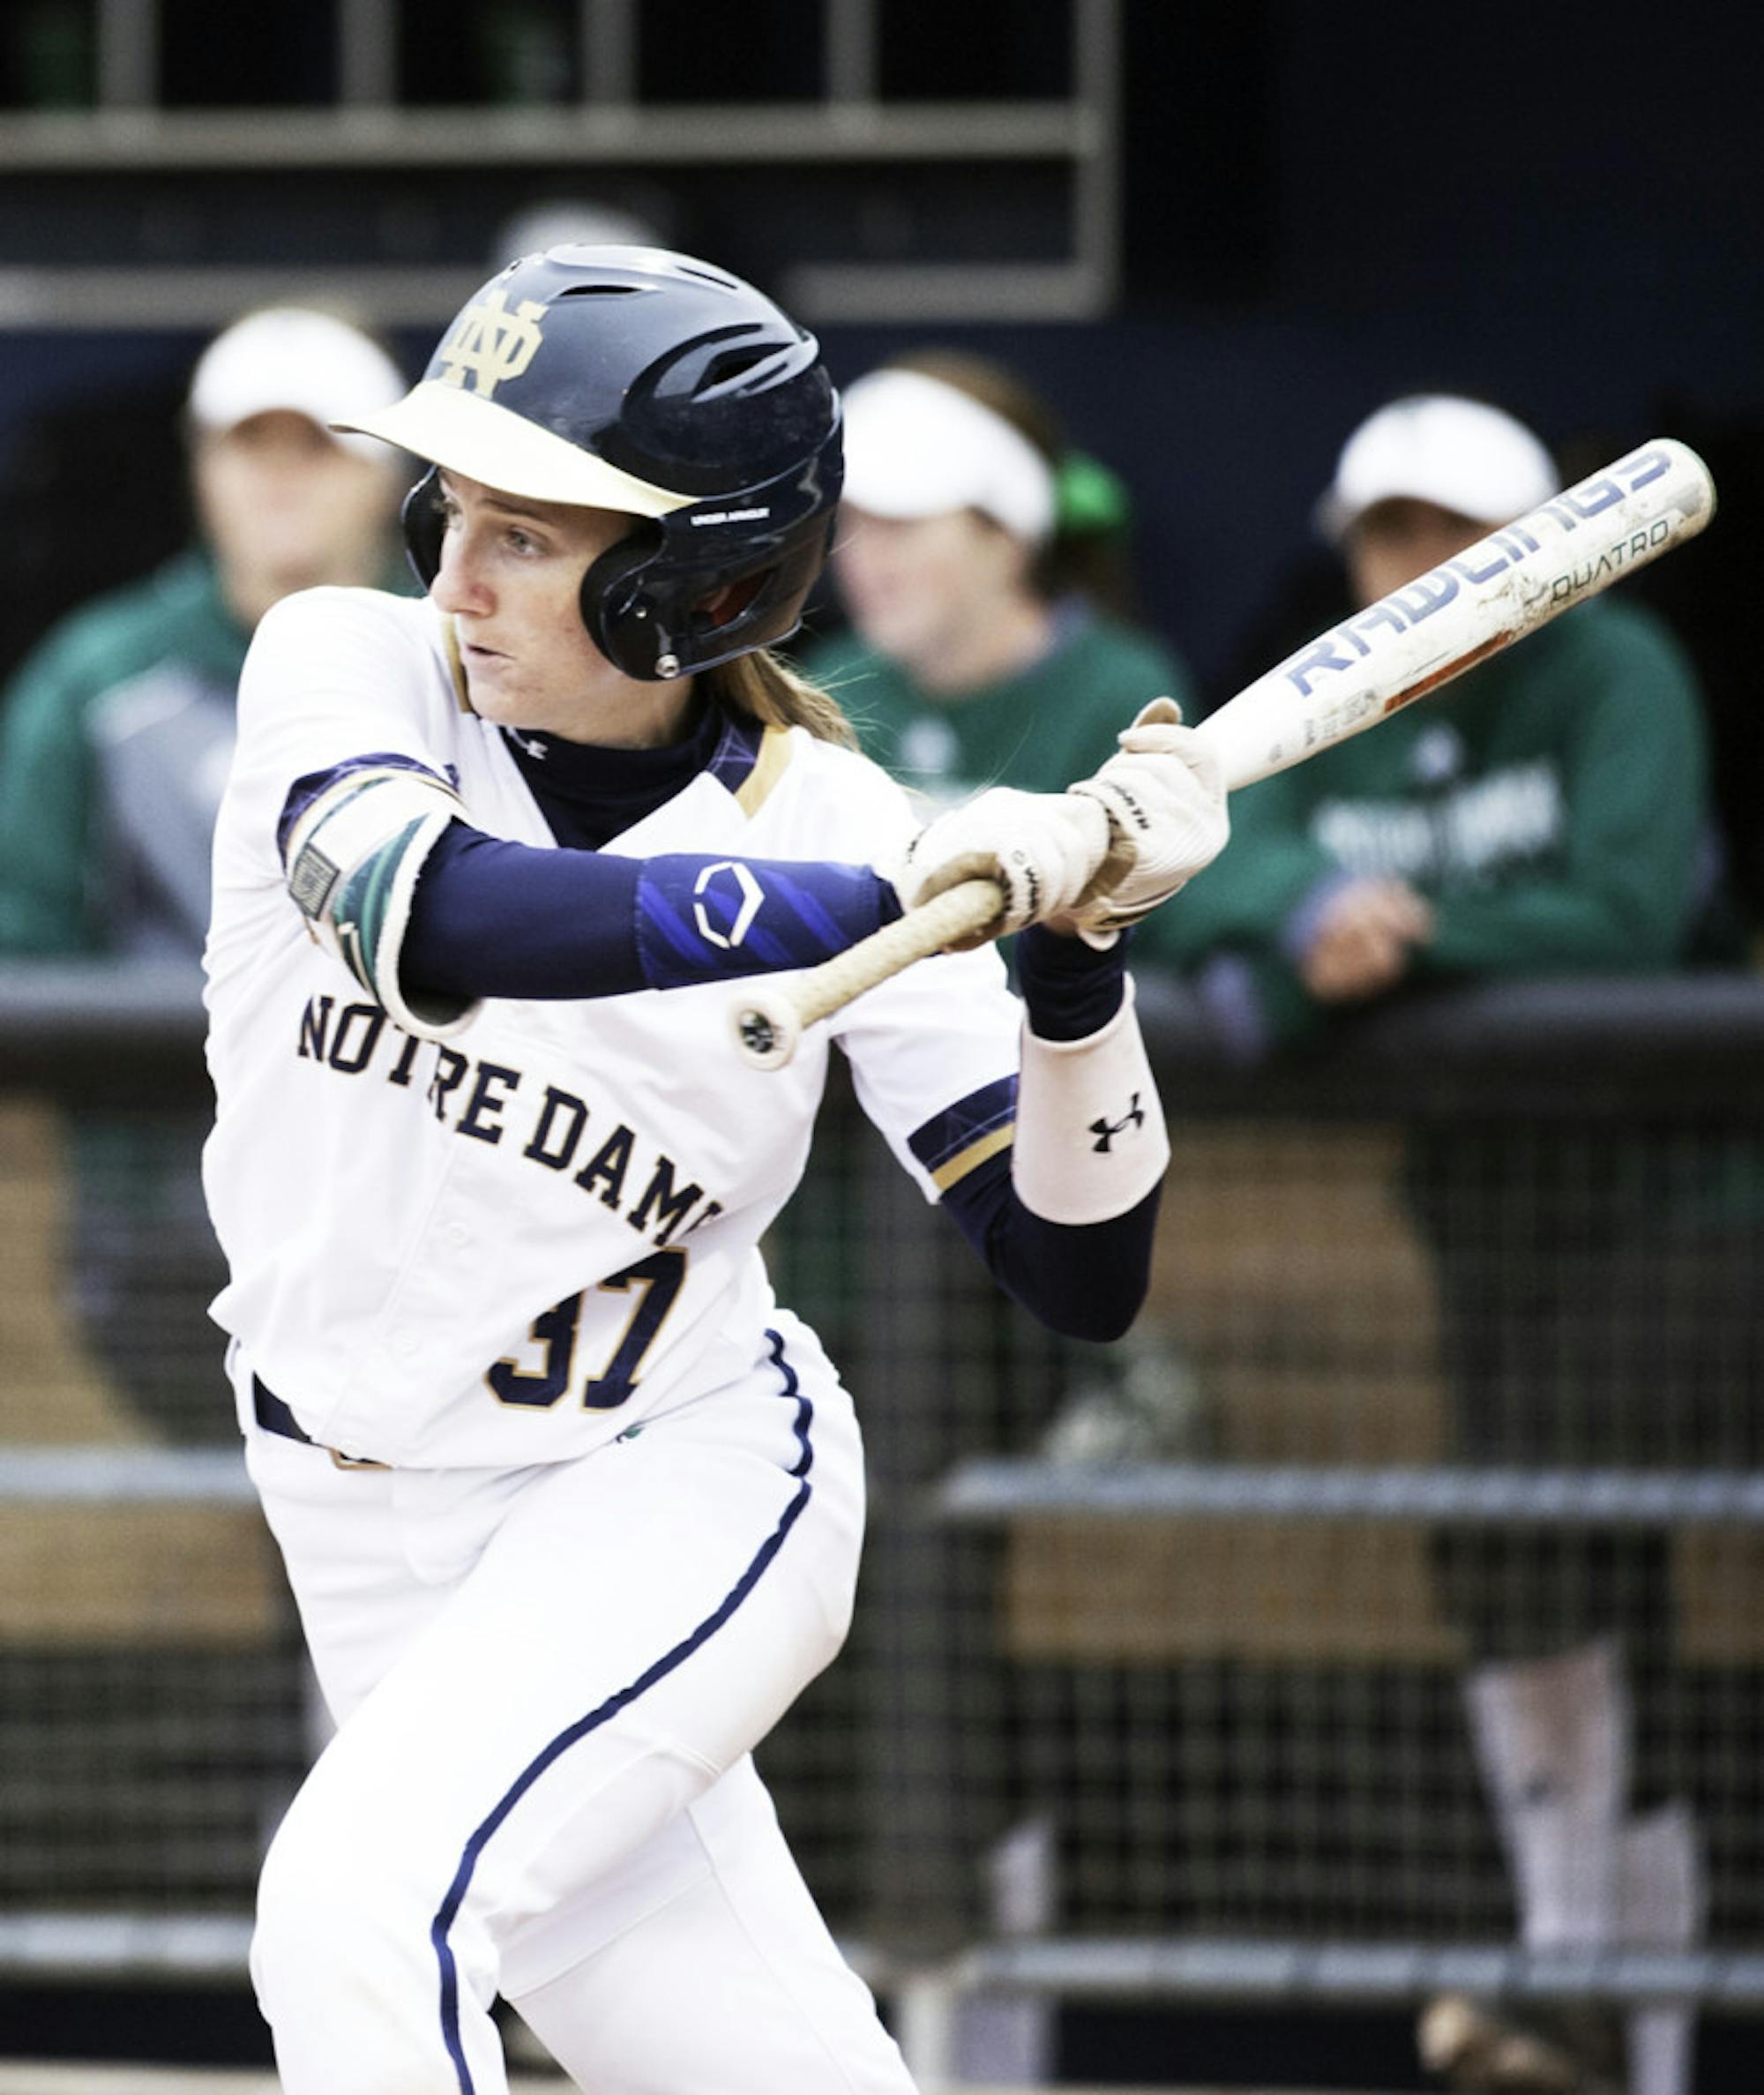 Irish sophomore outfielder Ali Wester swings at a pitch during Notre Dame’s 1-0 win over Eastern Michigan on March 29 at Melissa Cook Stadium.